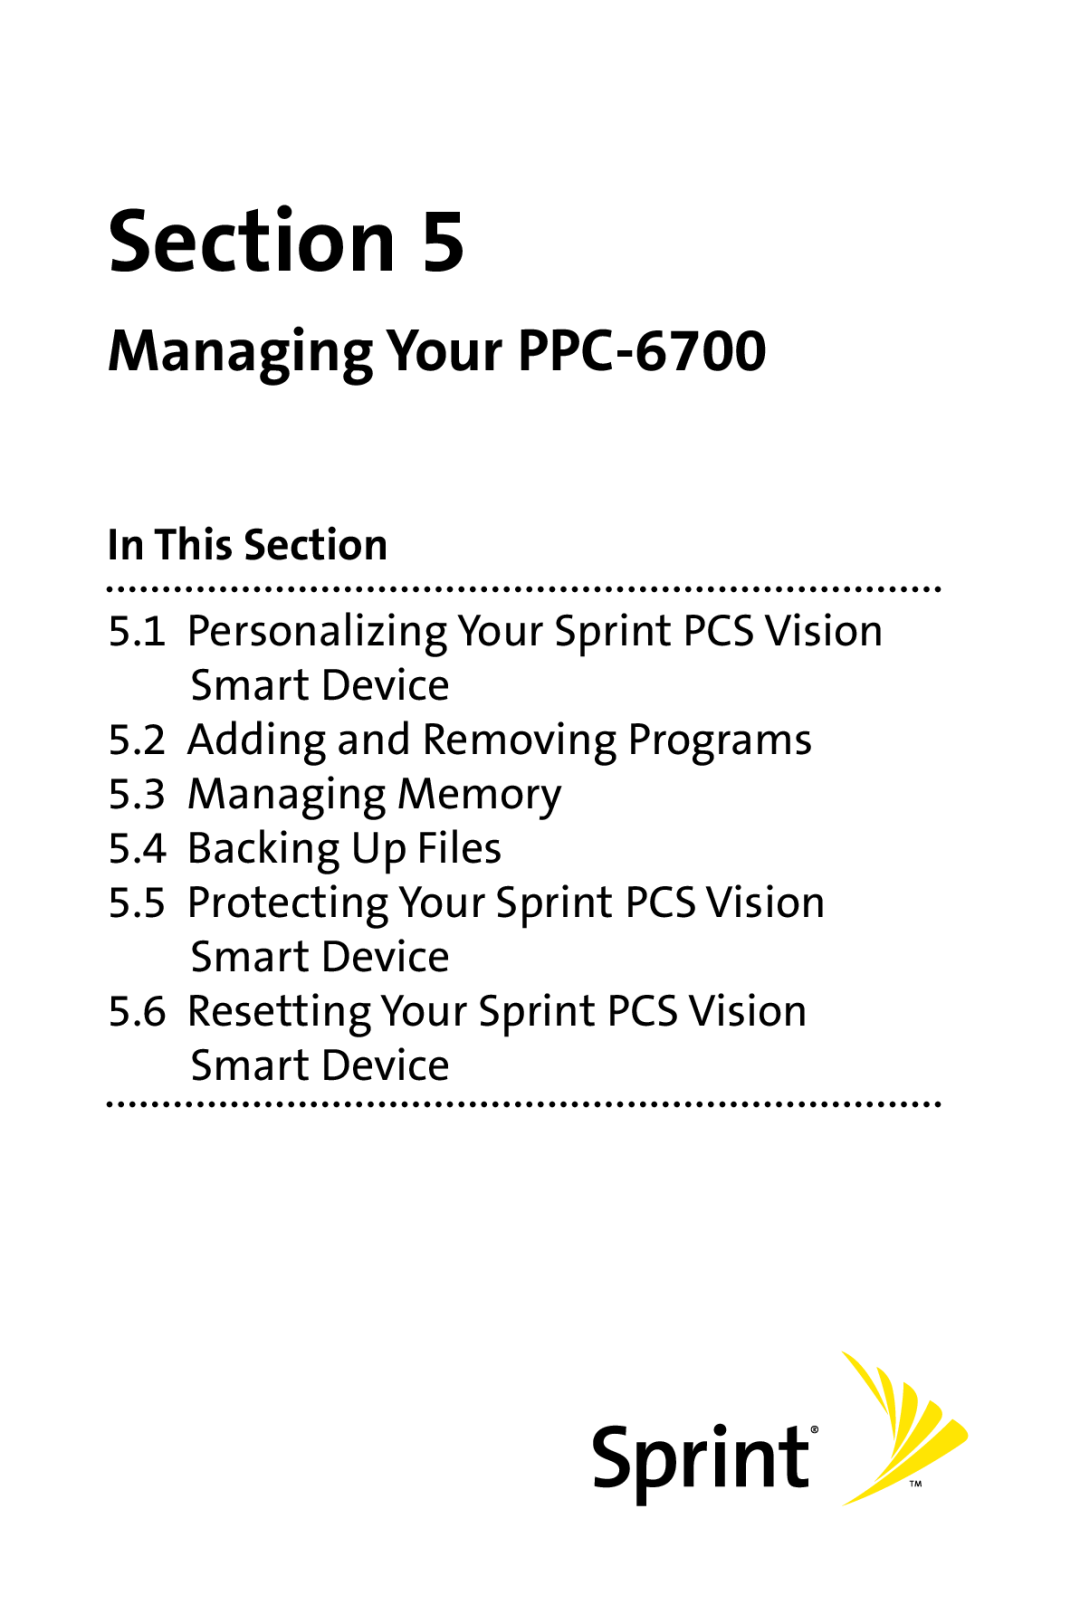 Sprint Nextel Managing Your PPC-6700, Personalizing Your Sprint PCS Vision Smart Device, Backing Up Files, Section 